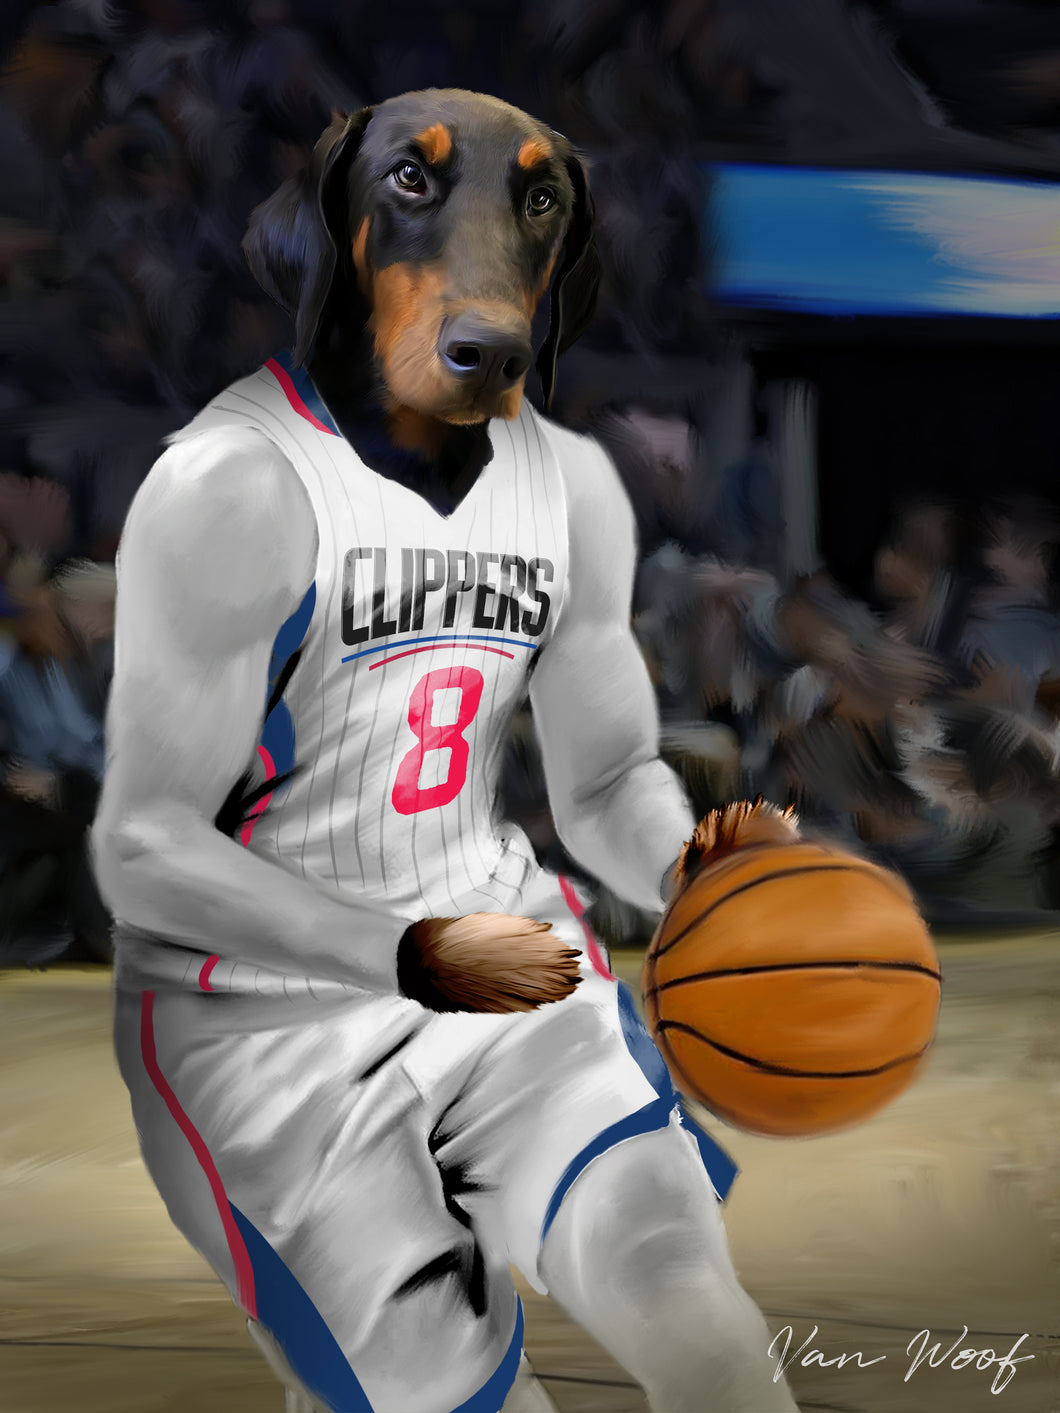 LA Clippers Basketball Player